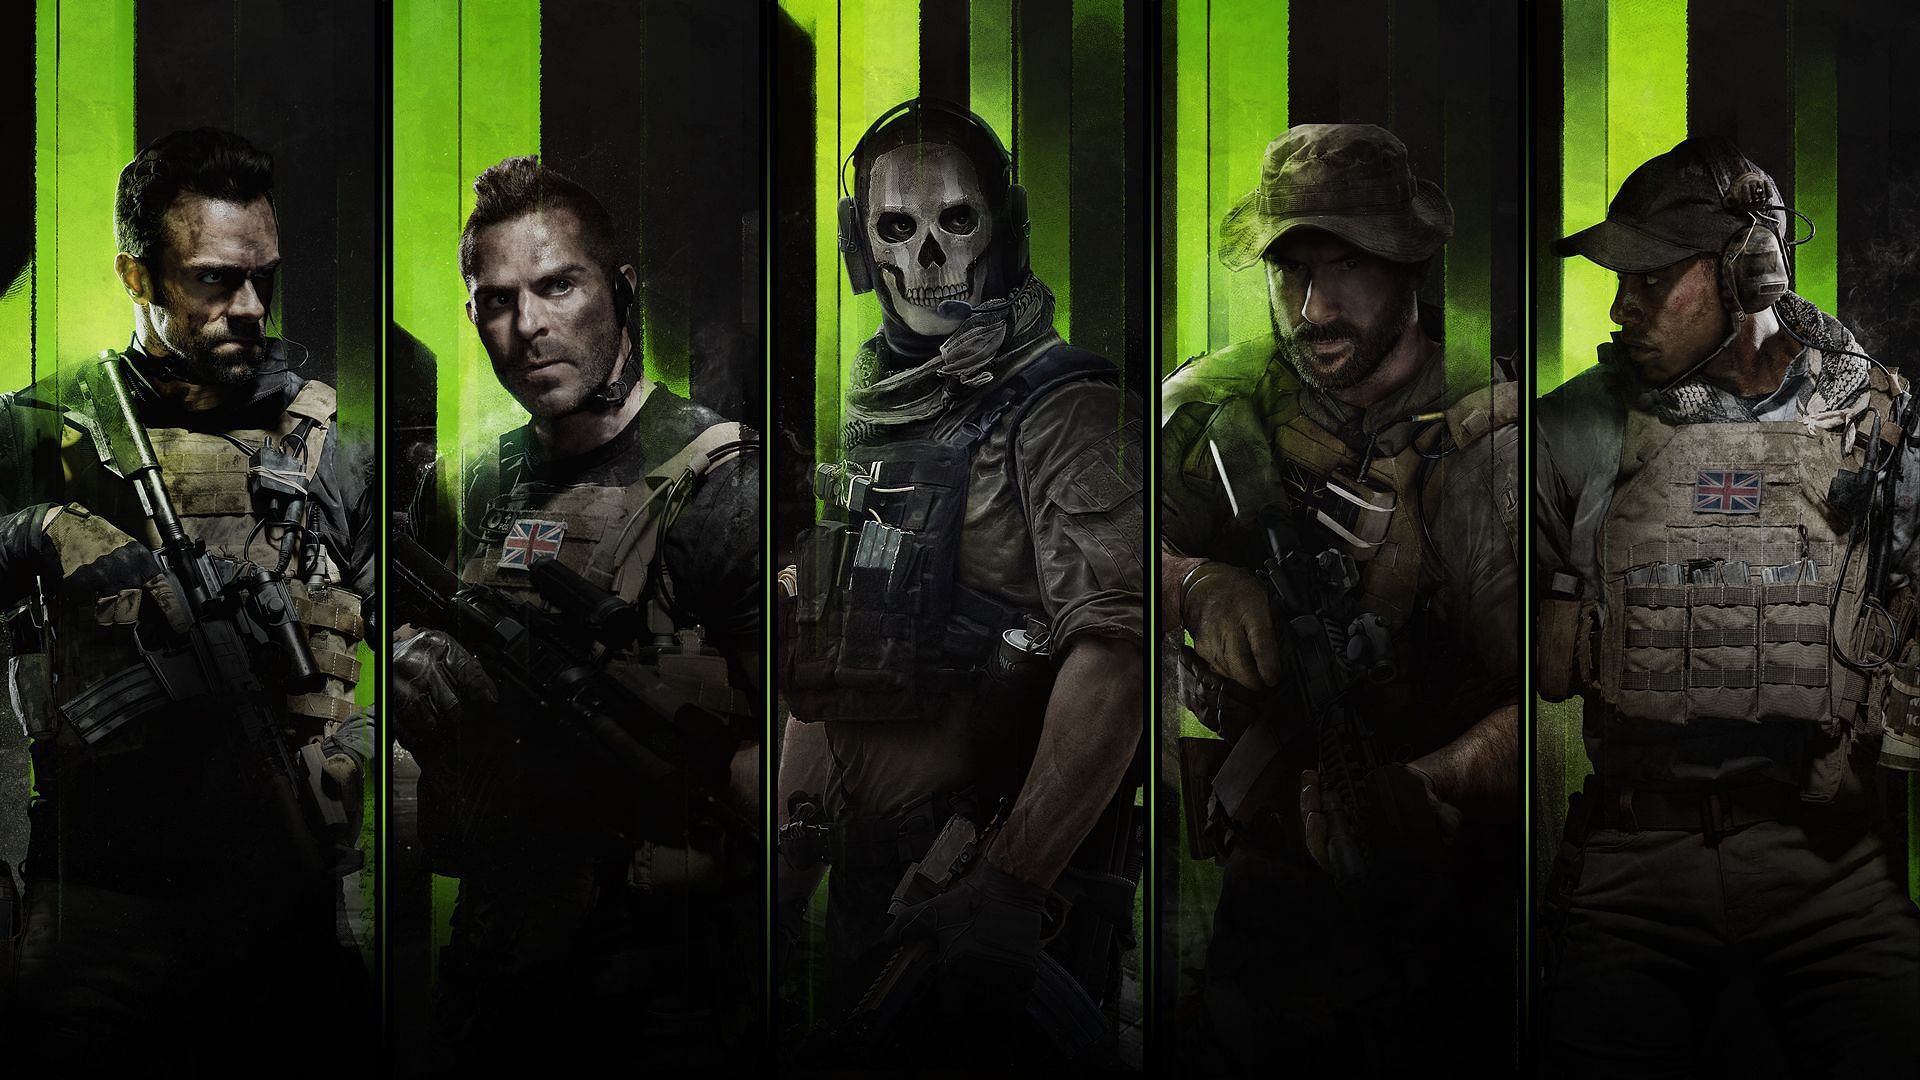 Call of Duty Modern Warfare 2019 story – what is the campaign plot, who are  the characters and is Captain Price back?